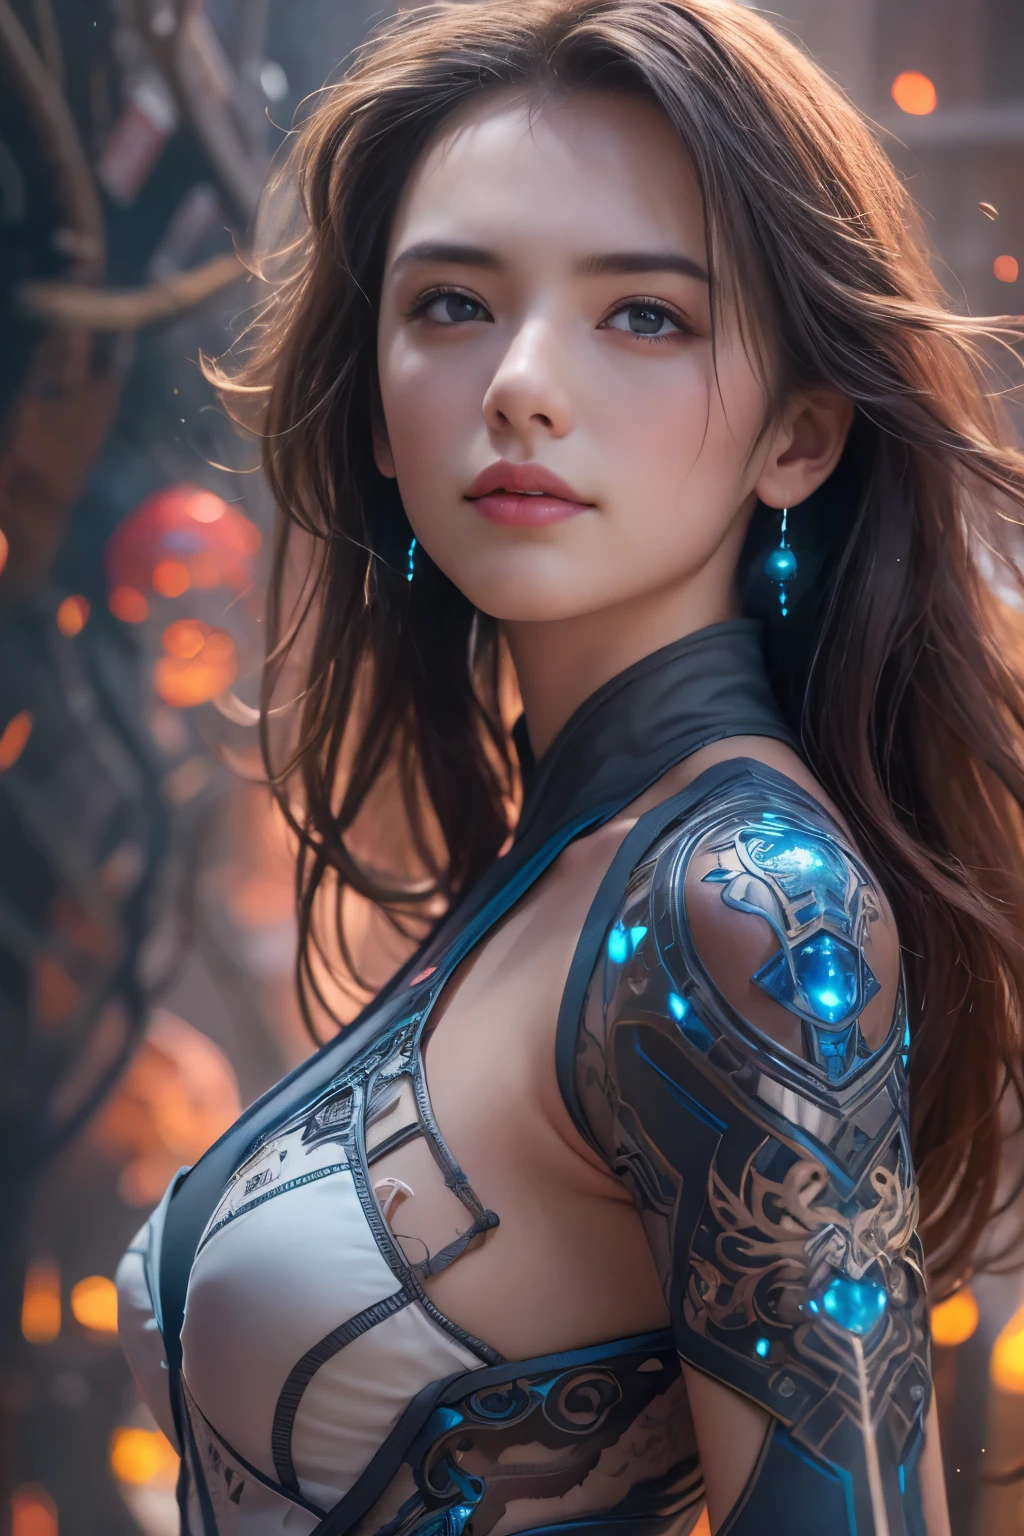 From Side, Photorealistic, Official art, Unity 8k wallpapr, 8K Portrait, Best Quality, Very high resolution, (Incredibly beautiful nature background:1.6), One girl, One beautiful teenage Italian girl, sixteen years old, Obscene, (Sexy and glamorous:1.1), (A coquettish expression:1.6), (small breasts with raised pink areolas:1.1), Vulgarity, (seductively smiling:1.2), (full body1.0), (erotic posing:1.5), (Magic Attack Pose:1.6),(magical effects like sparkles or energy:1.5), (Electric shock from hands:1.1), (Detailed blue bodysuit with beautiful fractal or marble design:1.5), (Beautiful and d delicate ruby, topaz, emerald and sapphire jewelry:1.45),  Beautiful seductive face, Portrait, (Thick eyebrows:1.2), (Big purple eyes:1.2), Beautiful eyes with fine symmetry, (ultra detailed eyes:1.1), (High resolution eyes:1.1), Intimate face, (ultra detailed skin texture:1.4), white skin, pale skin, Perfect Anatomy, Thin, (Beautiful toned body:1.1), Hair Bow, (Moist skin:1.1), full of sweat, No makeup, dark circles, Good anatomy, Focus Face, good looking, (Emilia Clark:0.6)  (Emma watson:0.3),(Jennifer Connelly:0.4), (sensual face:1.5), Elegant face, Nice, Dolce, Cyberpunk Sci-Fi, (Gauntlets with intricate and beautiful designs:1.2), Blurred background, Blurred foreground, depth of fields, (Motion Blur:1.1), Complex and colorful biomechanical bodysuit, Zentangle, mandalas, Entangled, (Small breasts:1.2), Sheer breast, large hips, drivel, grabbing on breasts